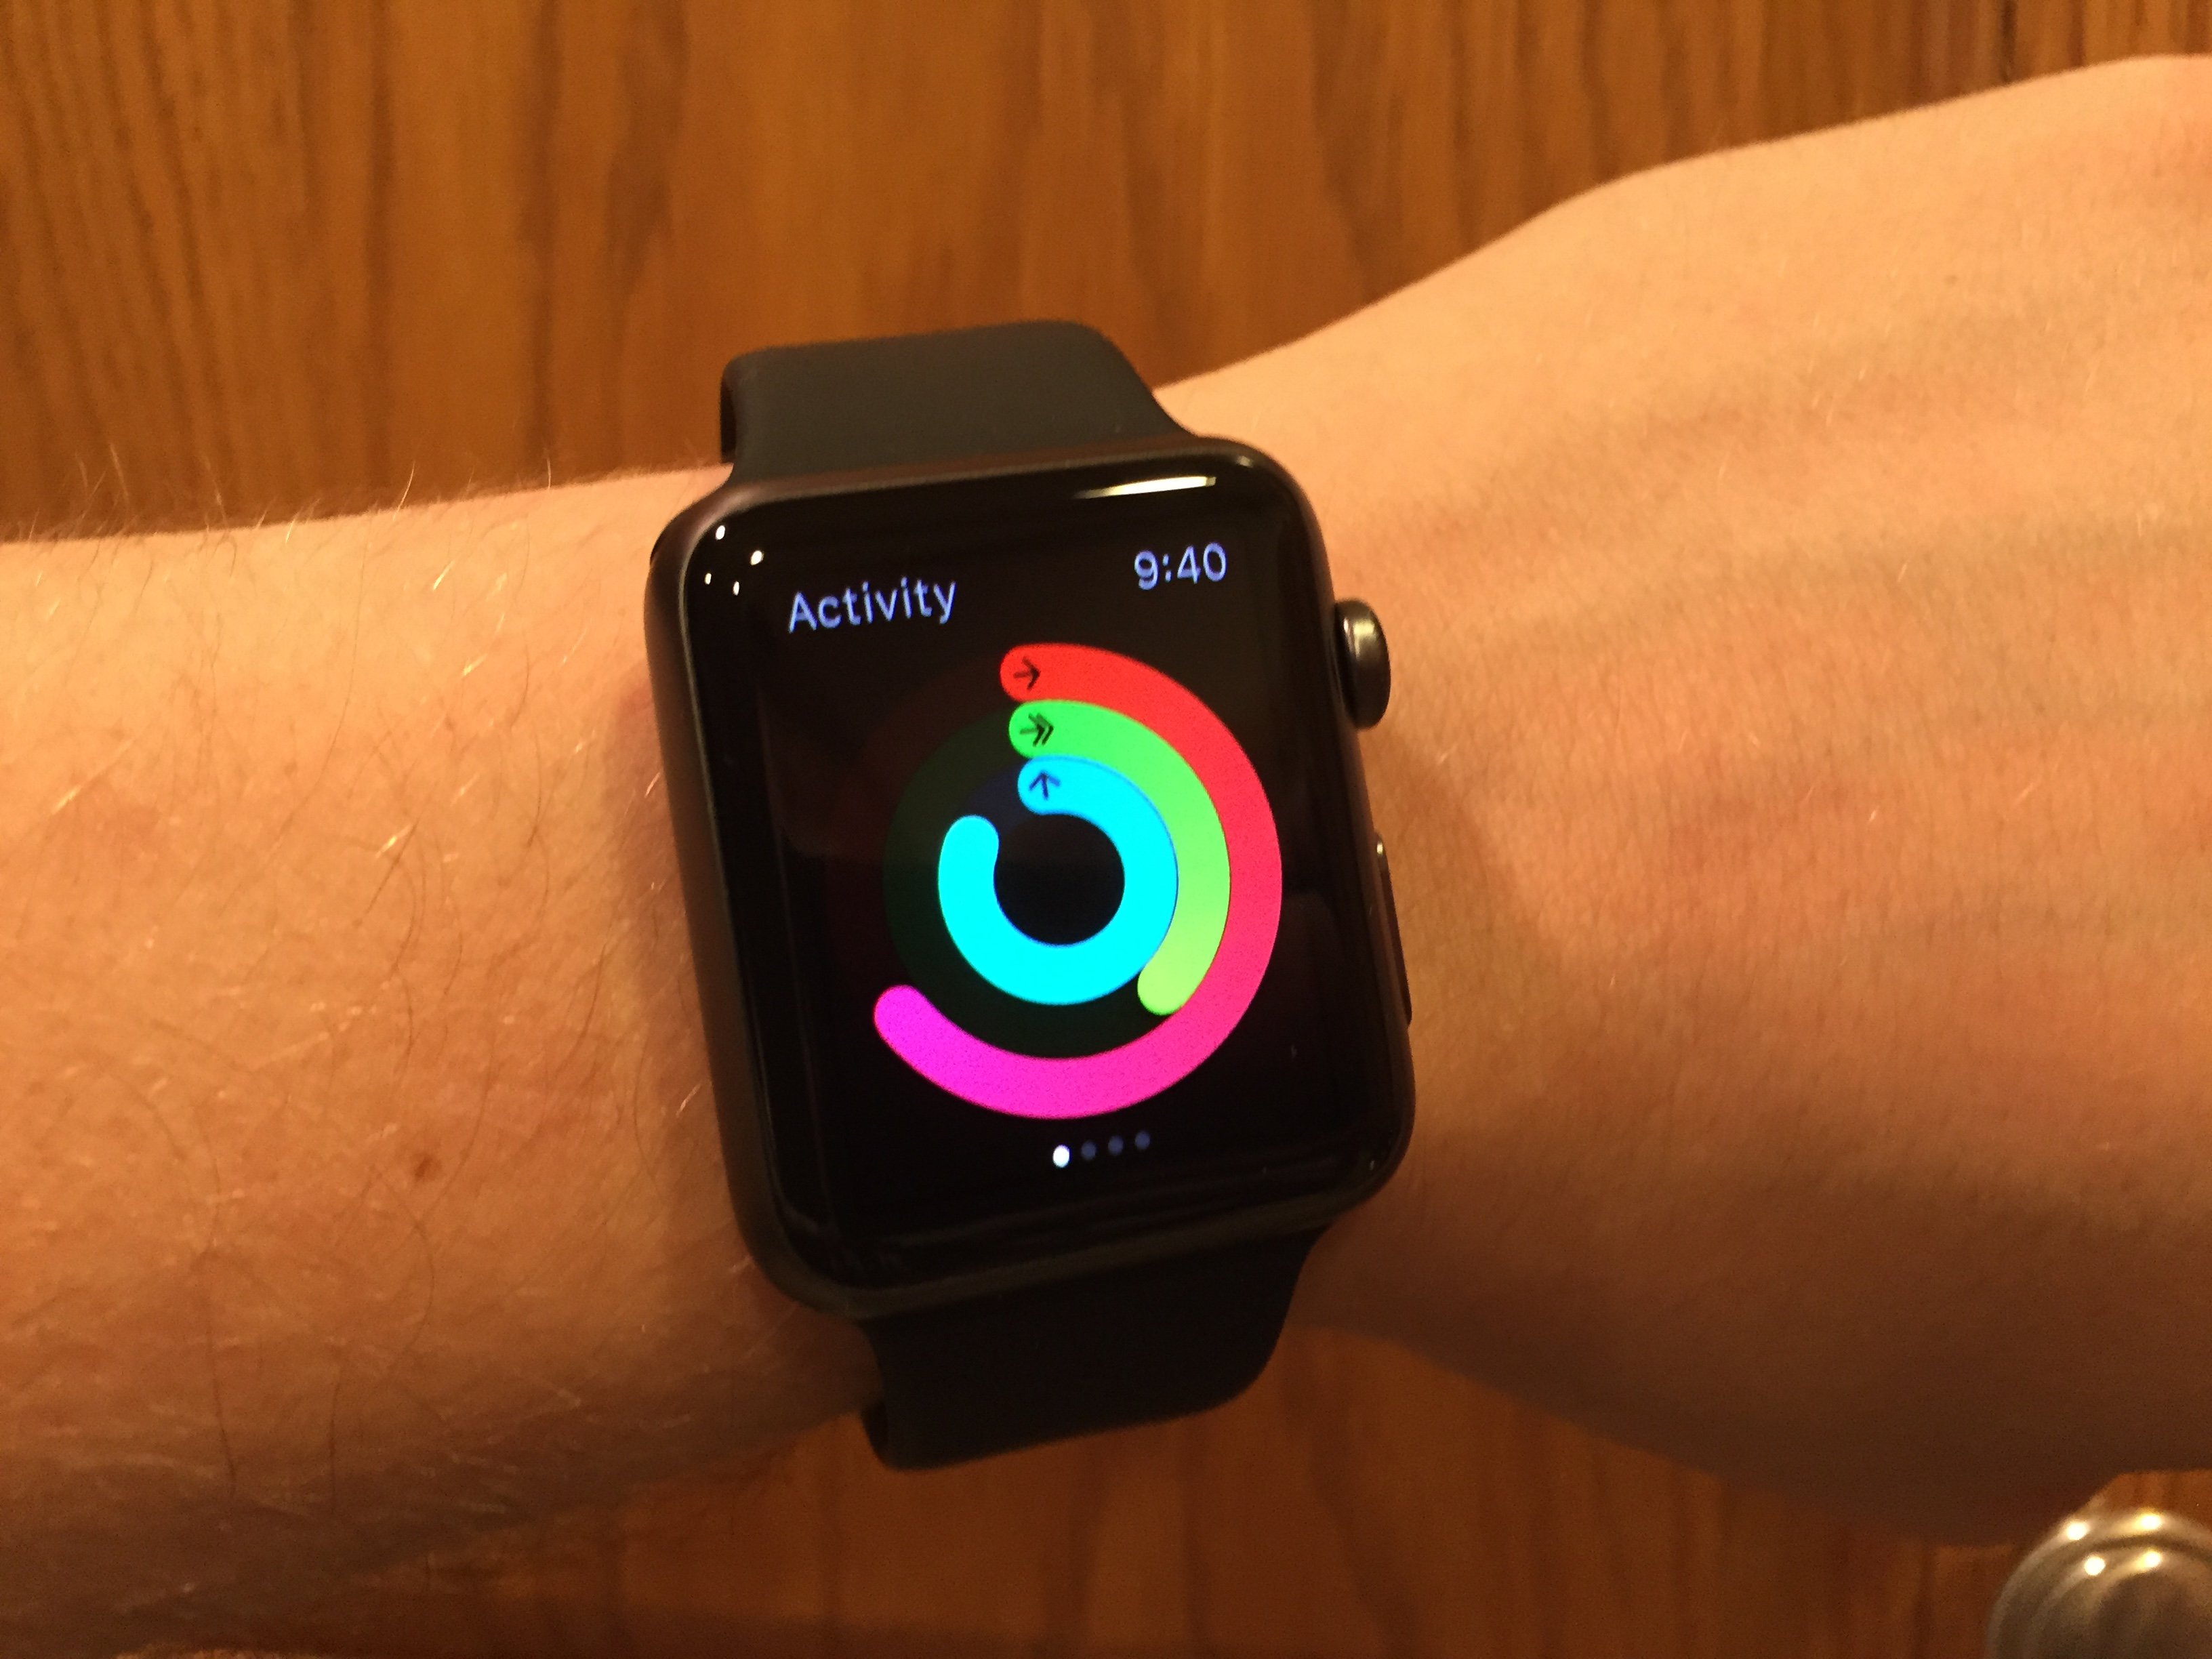 Learn how to fix common Apple Watch problems.